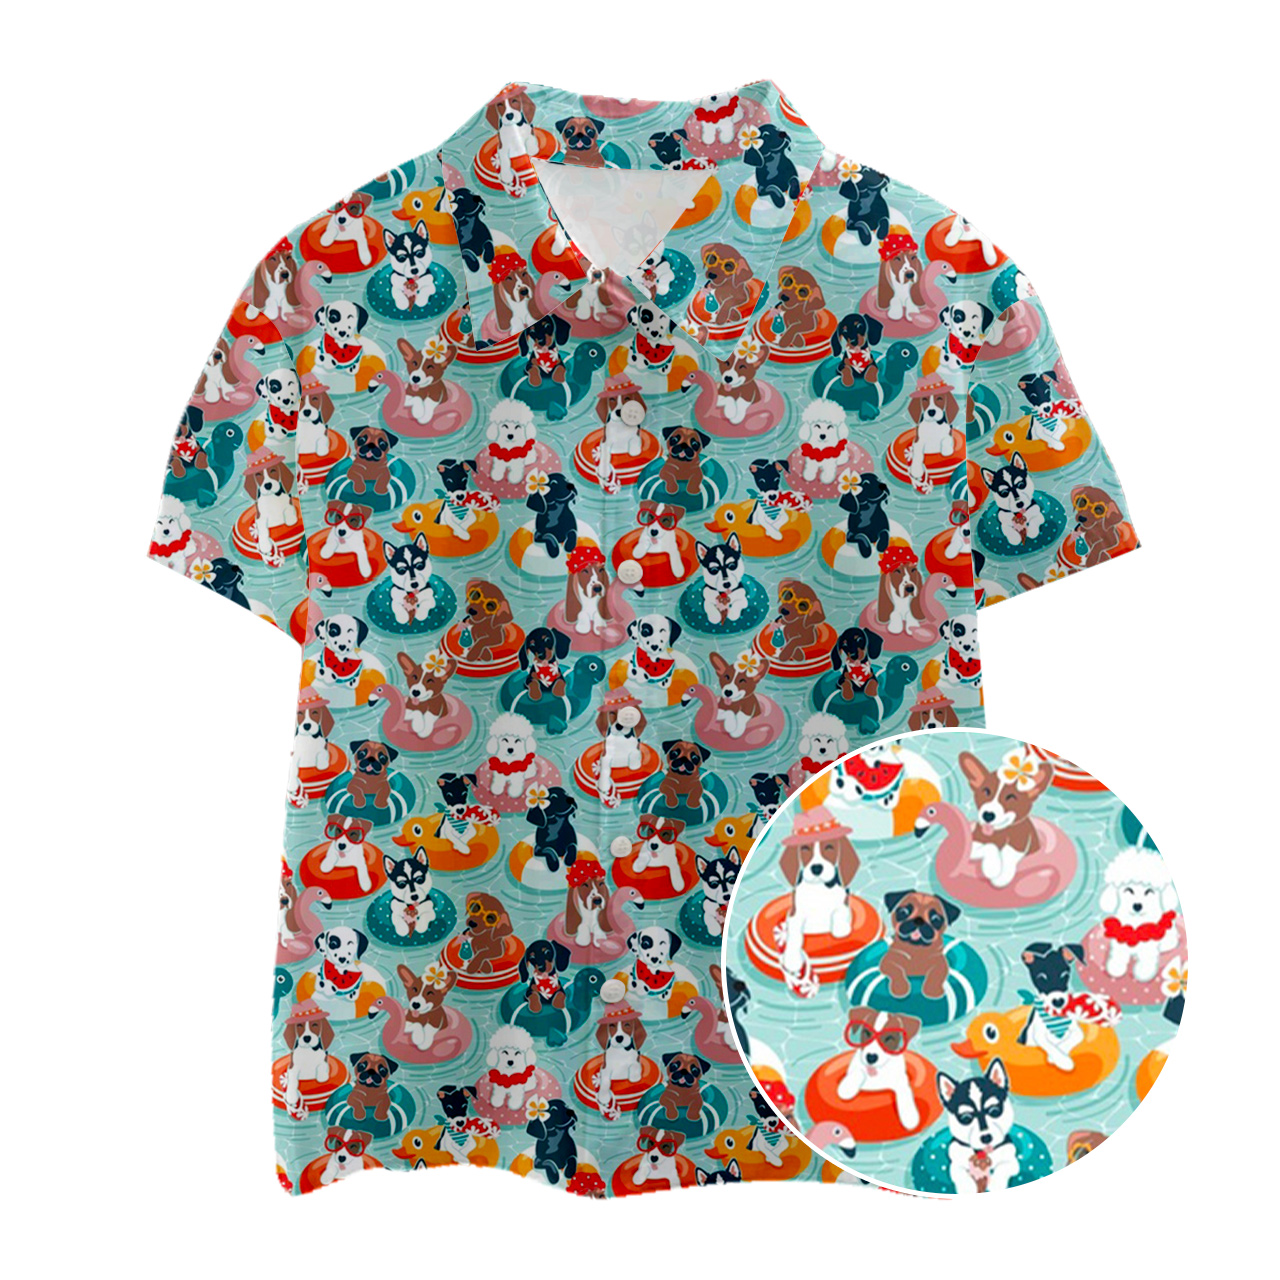 Swimming Pool Party Kids Button Shirt